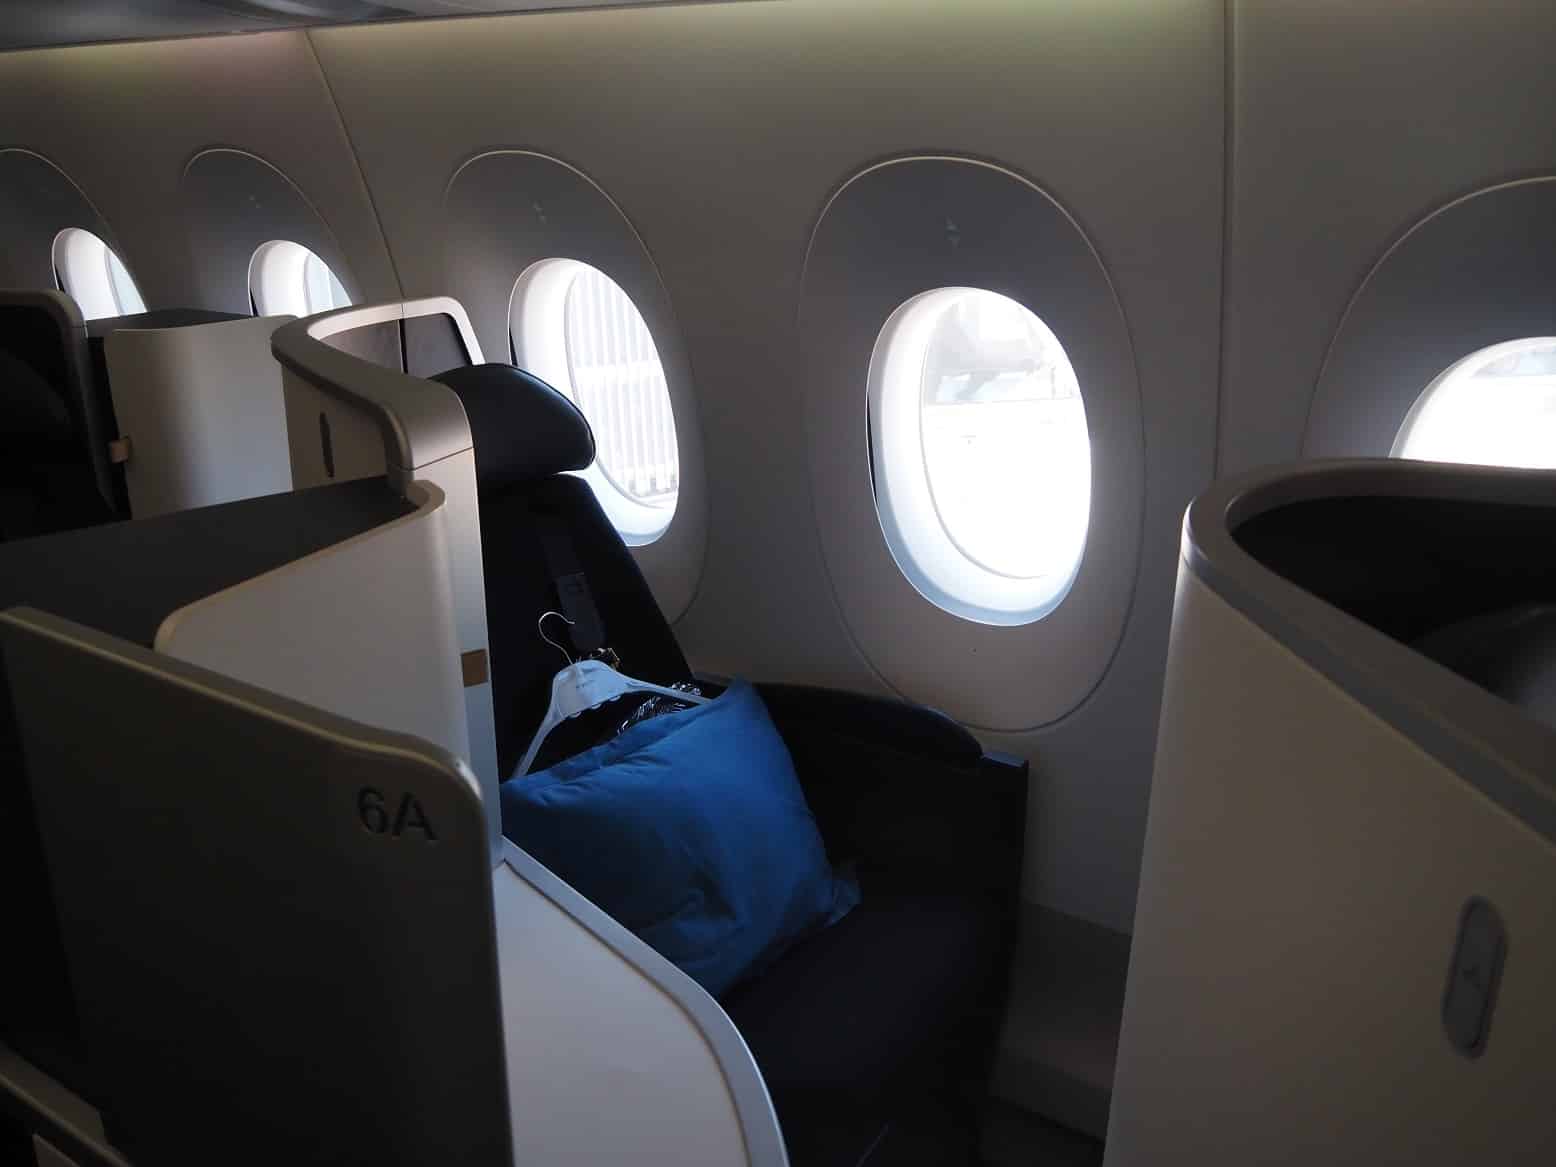 Mixed feelings - My Air France Business Class A350-900 review